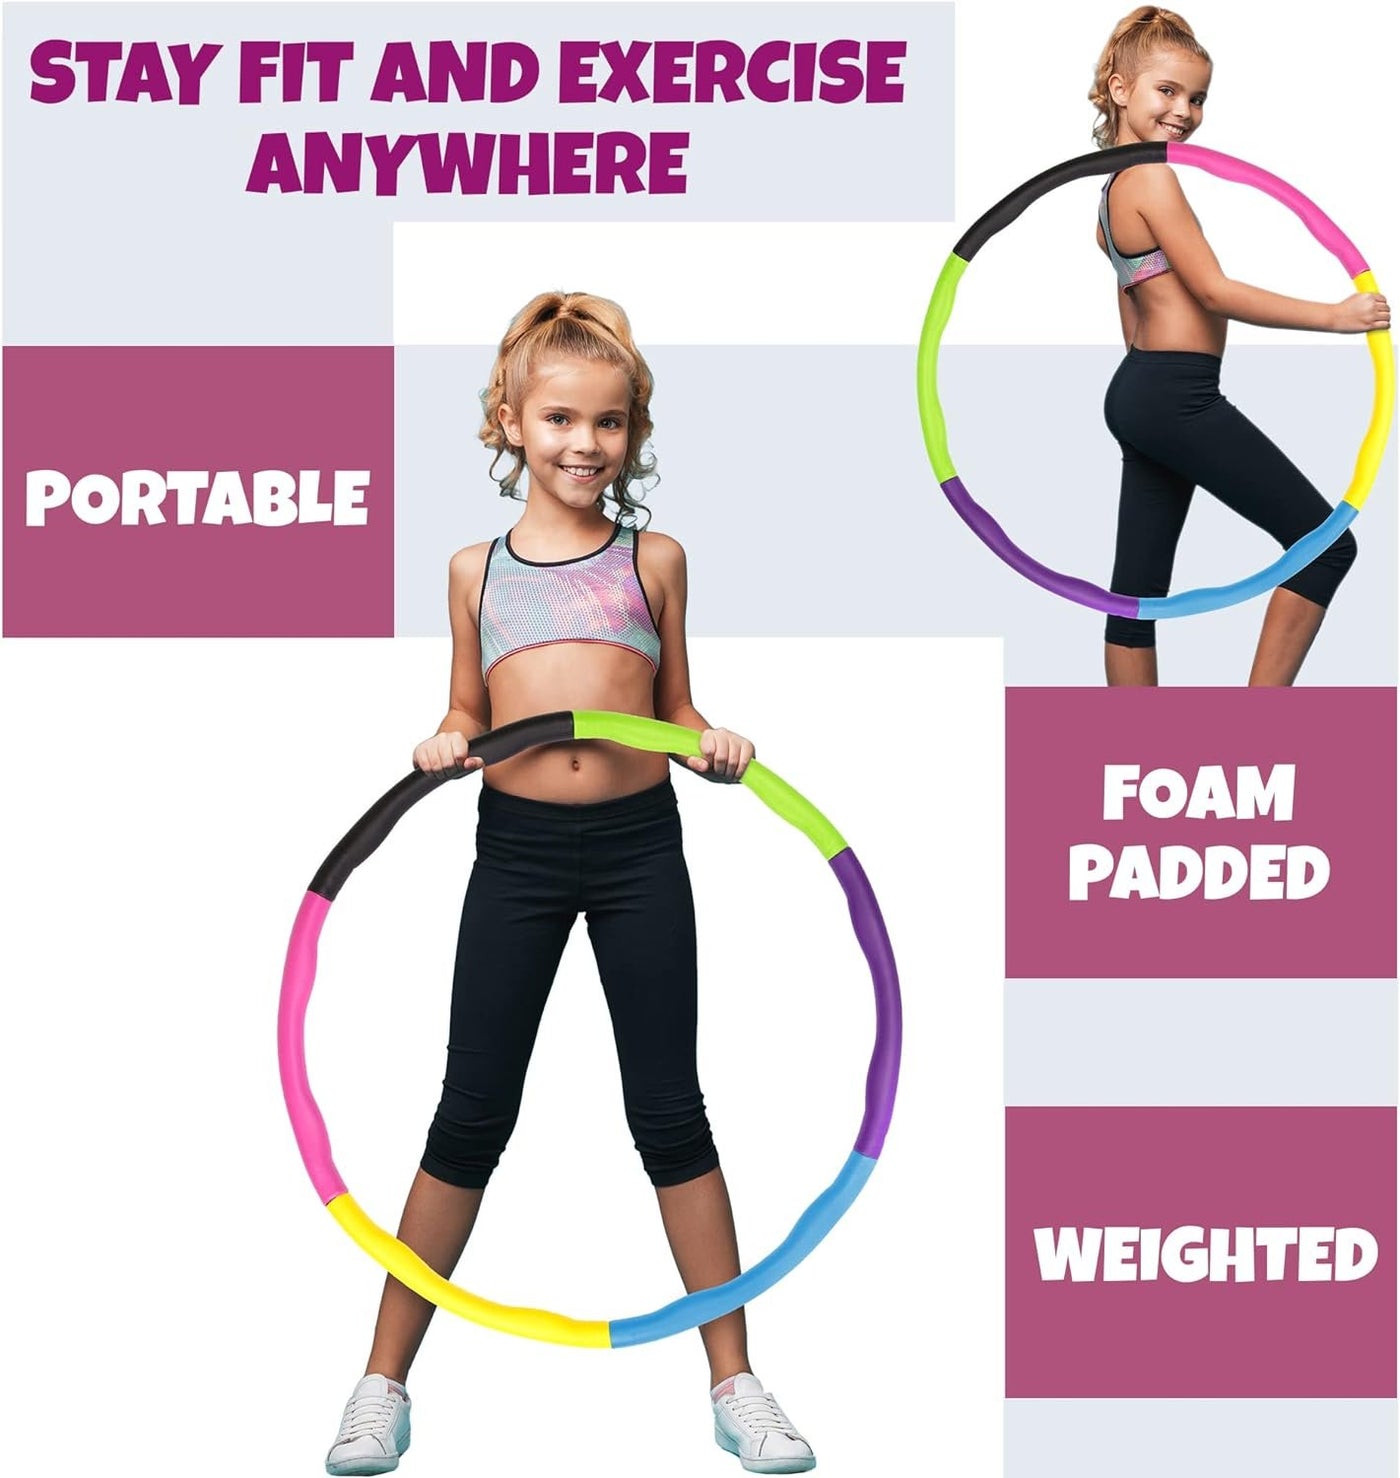 Weighted Hula Hoop for Kids - 2lb Weighted Hoola Hoop Toy for Exercise, 6 Section Detachable Hoola Hoops, Soft Padded & Portable, Kids’ Exercise Equipment & Outdoor Toy for Fun Workouts